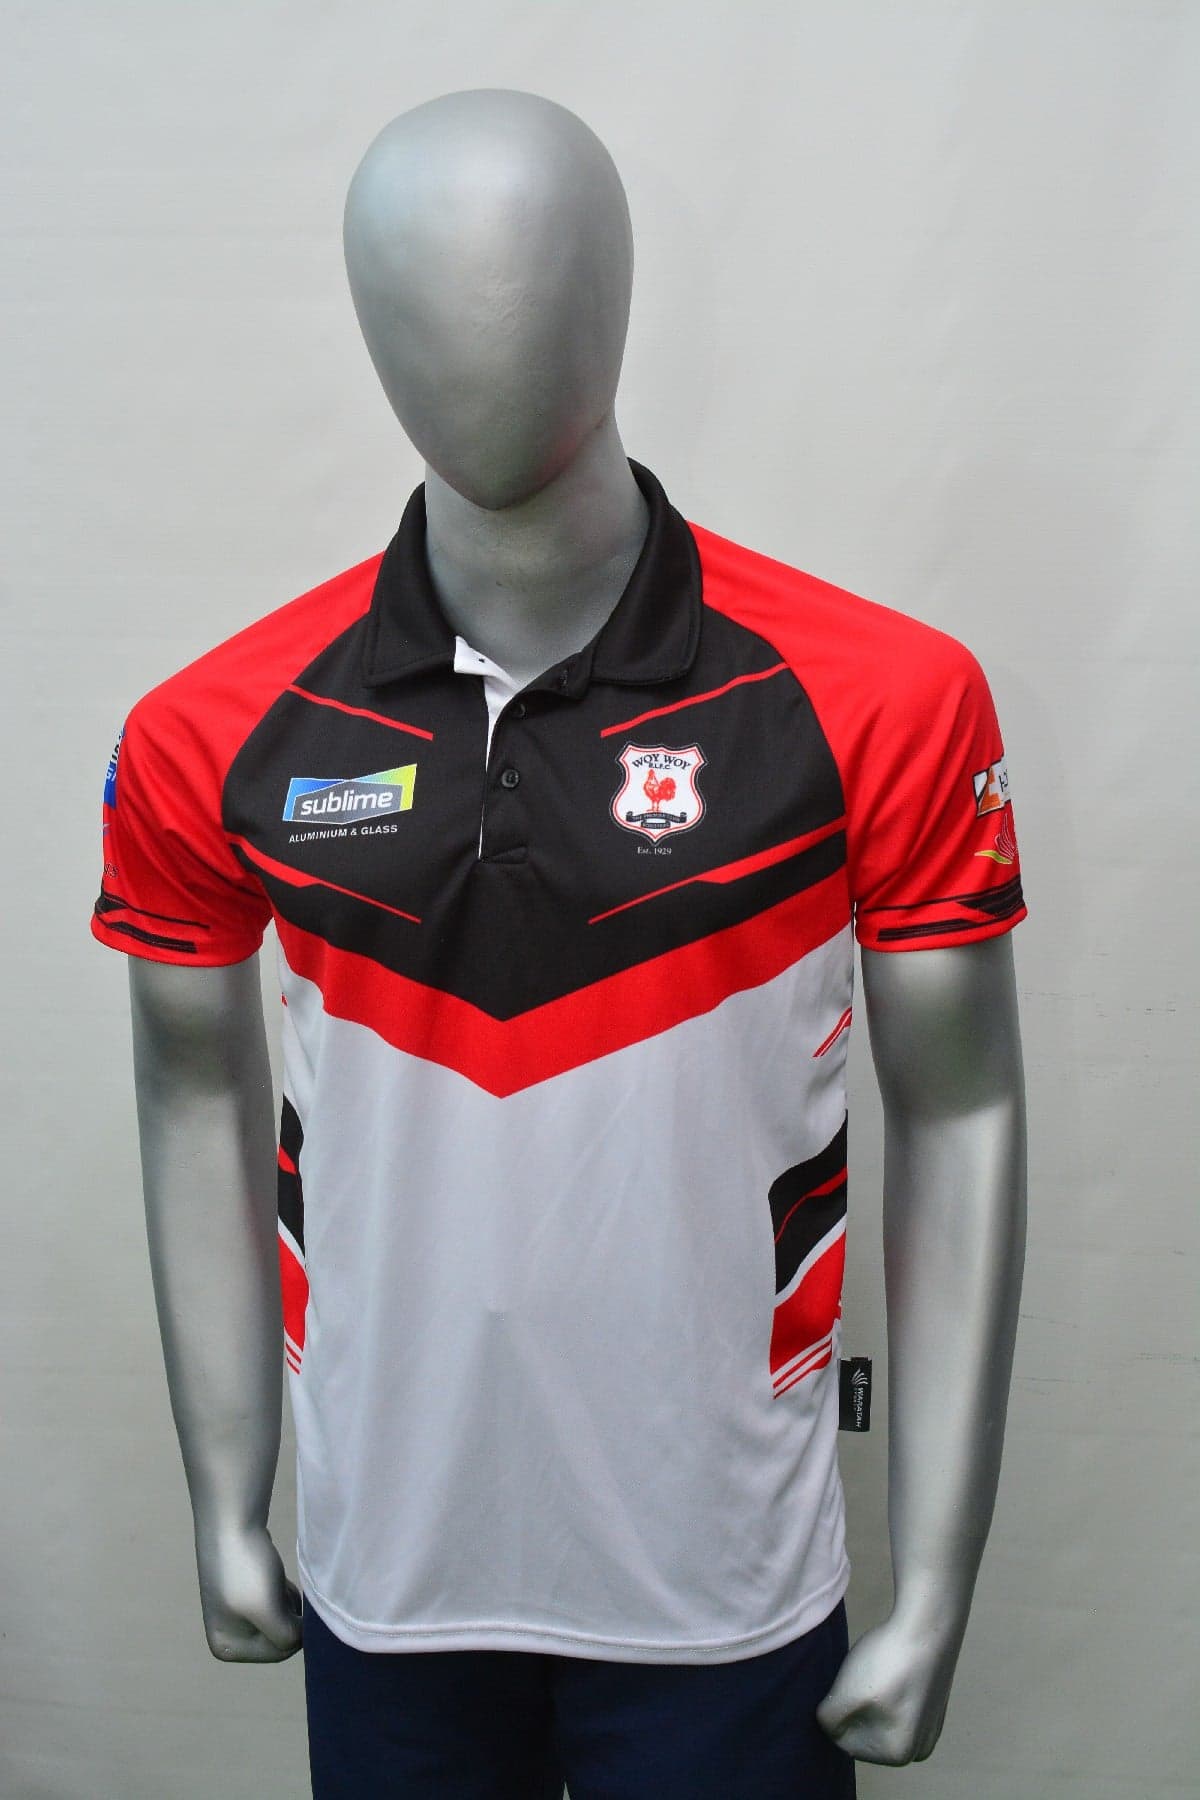 Polo Shirt with Printed Brand Logos — Sportscoast Trophies & Embroidery in Erina, NSW